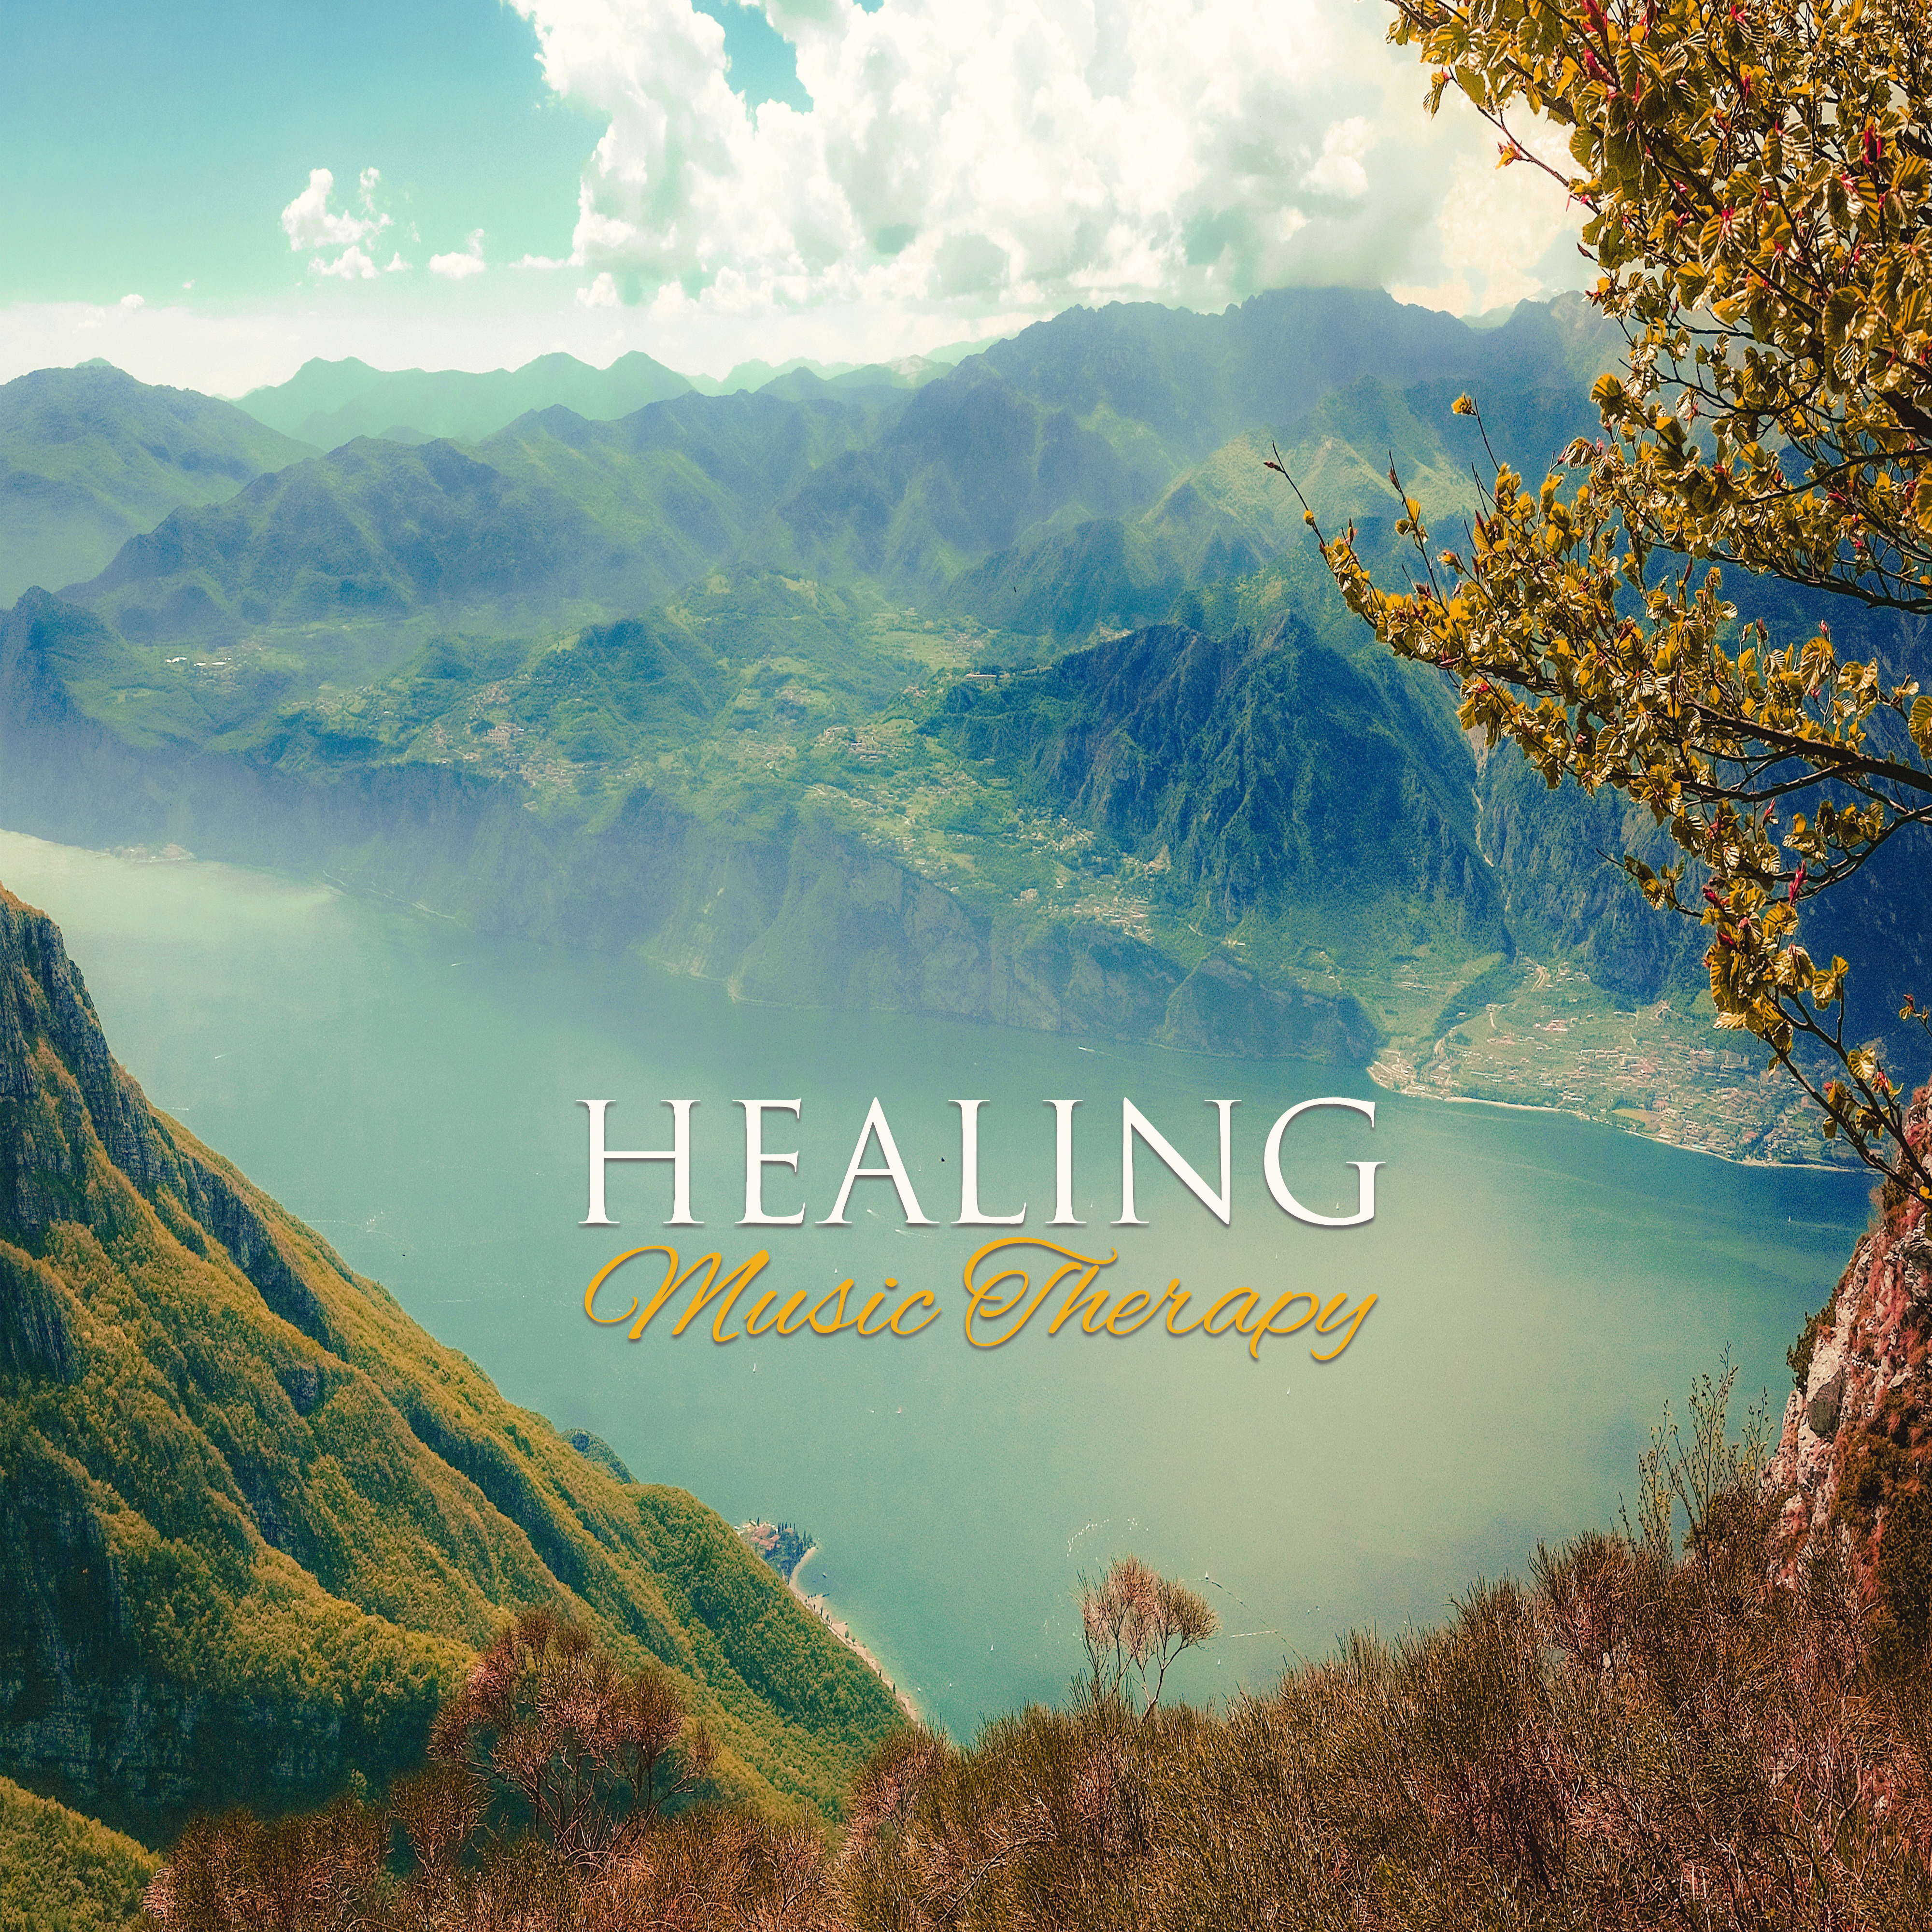 Healing Music Therapy – Relaxing Music for Calm Down, Rest, Deep Relaxation, Positive Mind